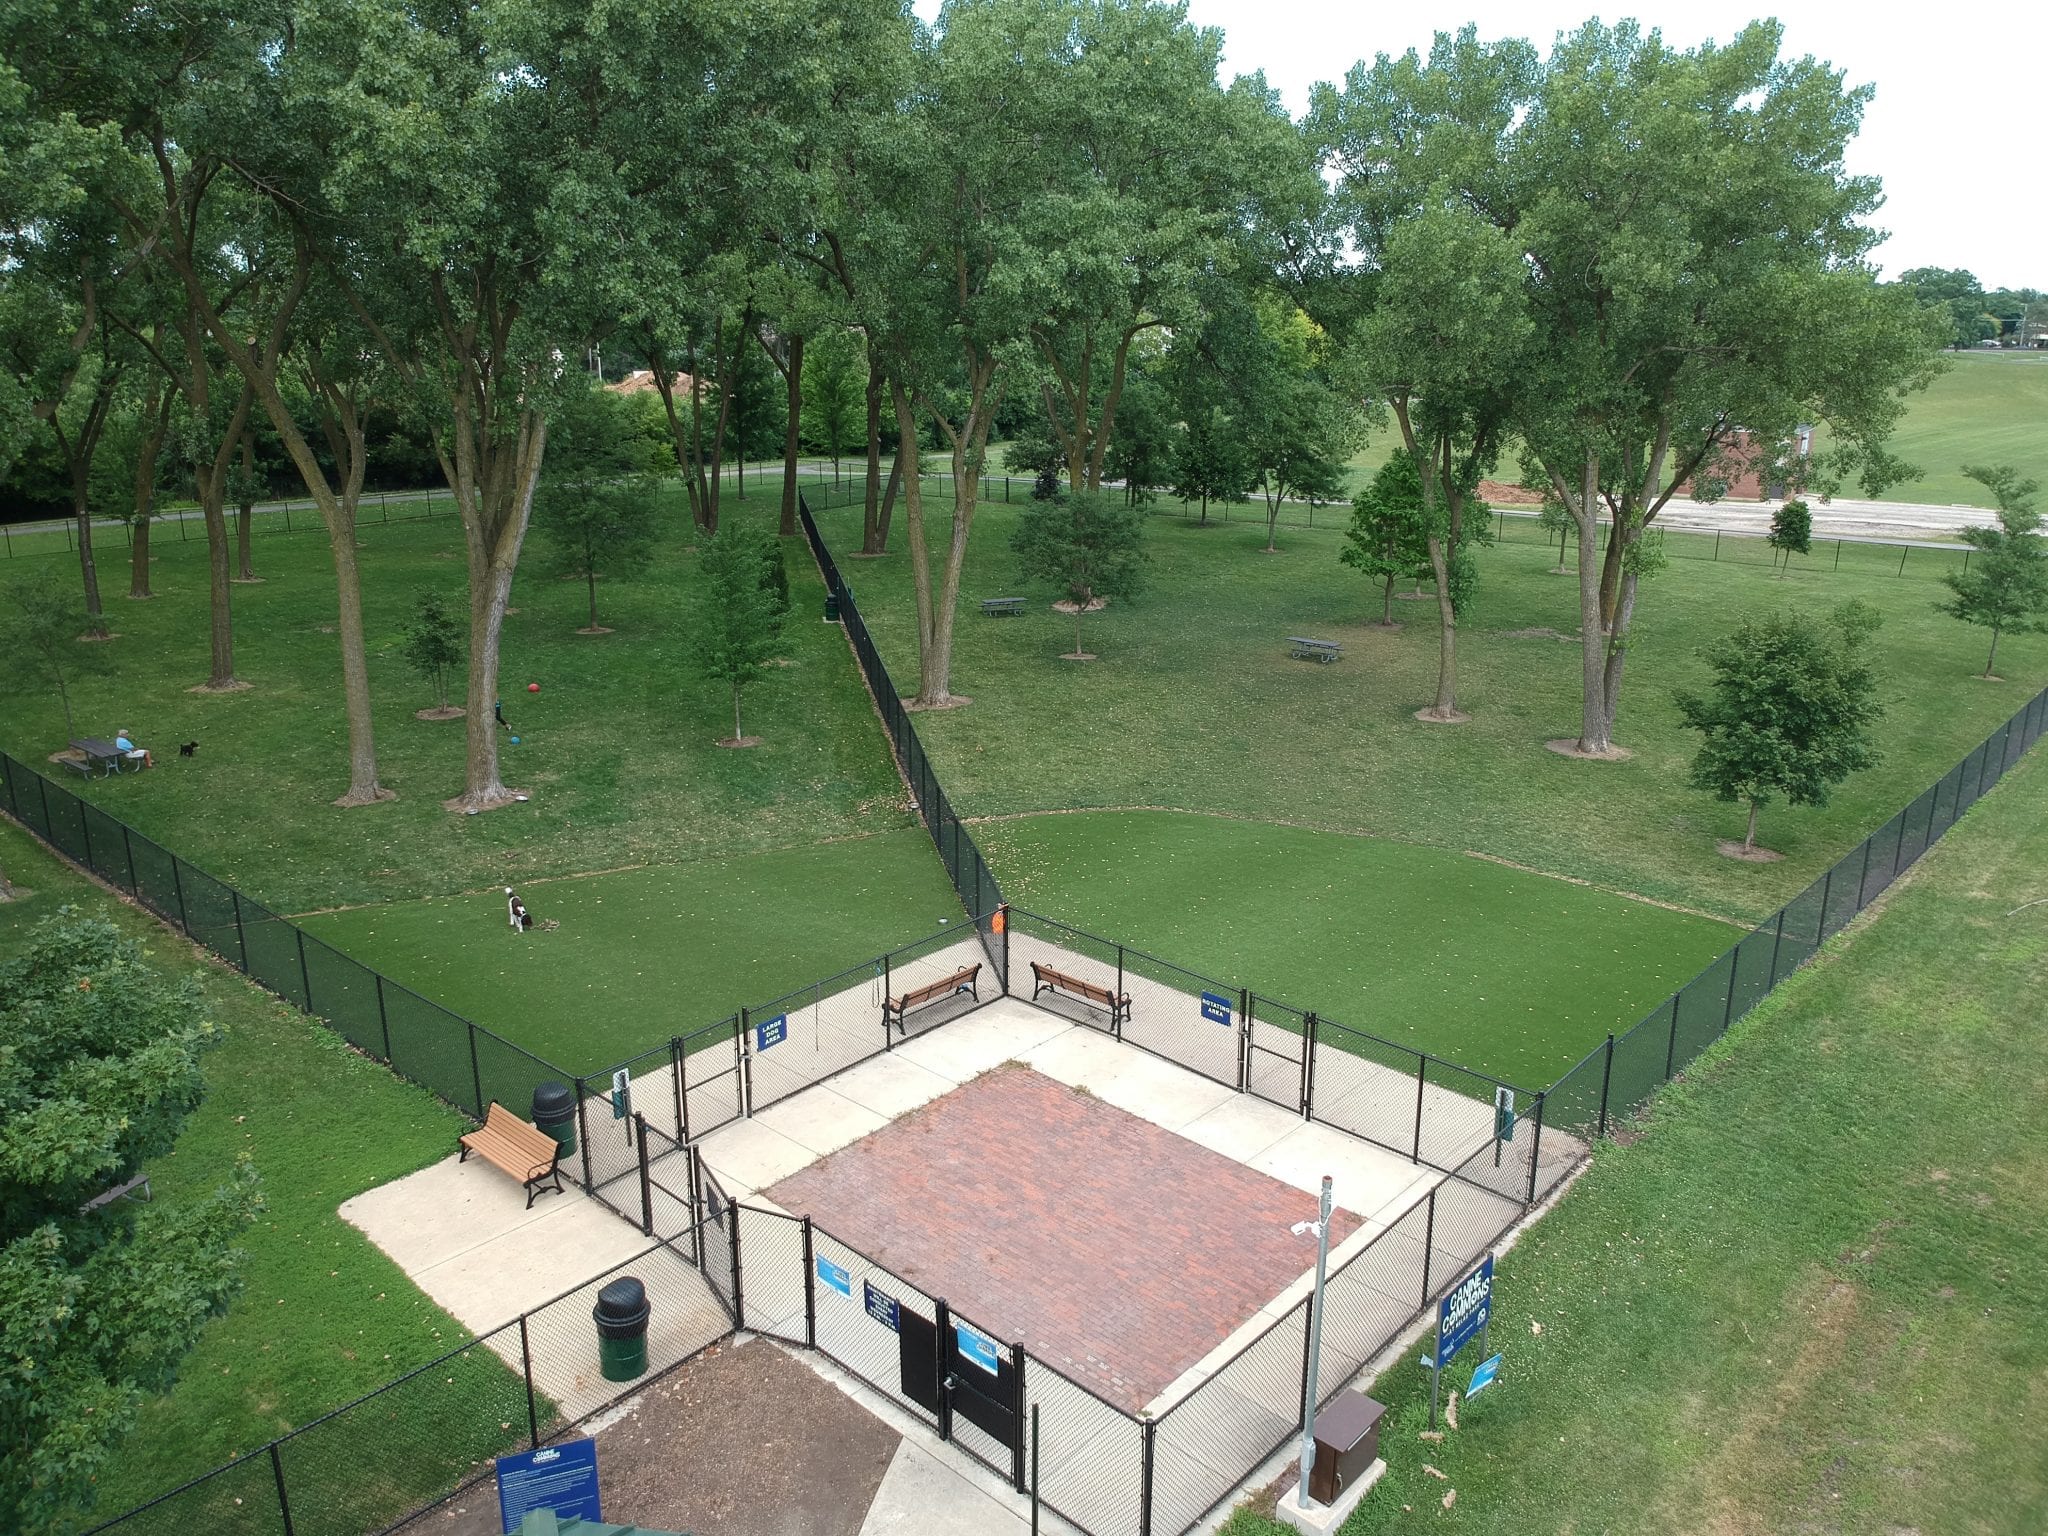 Aerial photo of Perfect Turf used at the Canine Commons Dog Park.